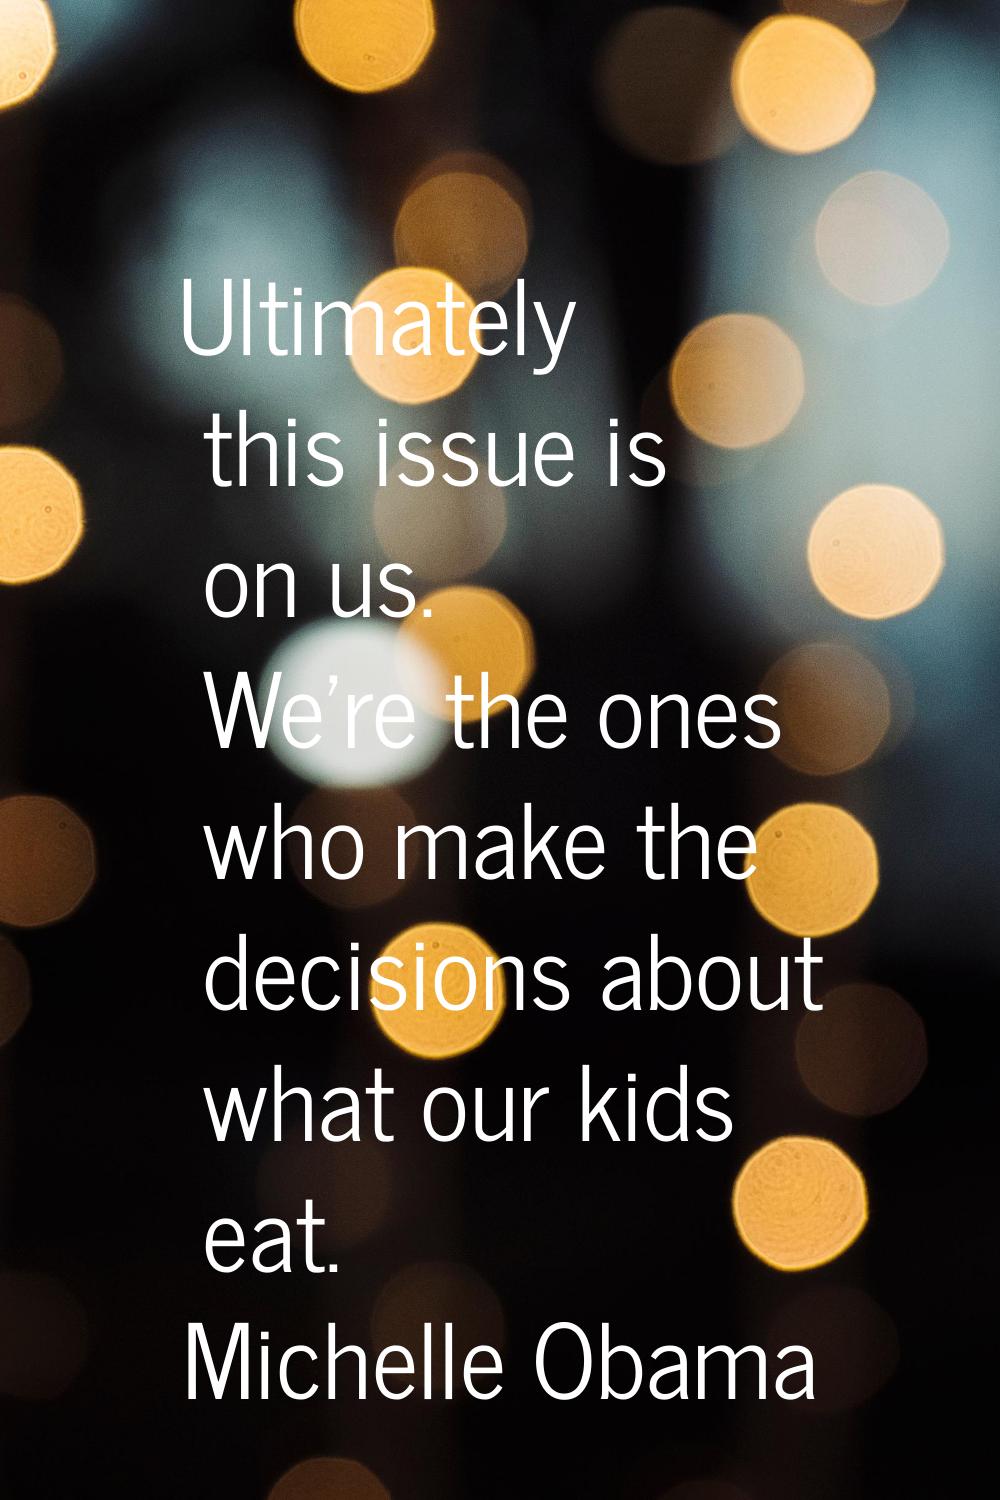 Ultimately this issue is on us. We're the ones who make the decisions about what our kids eat.